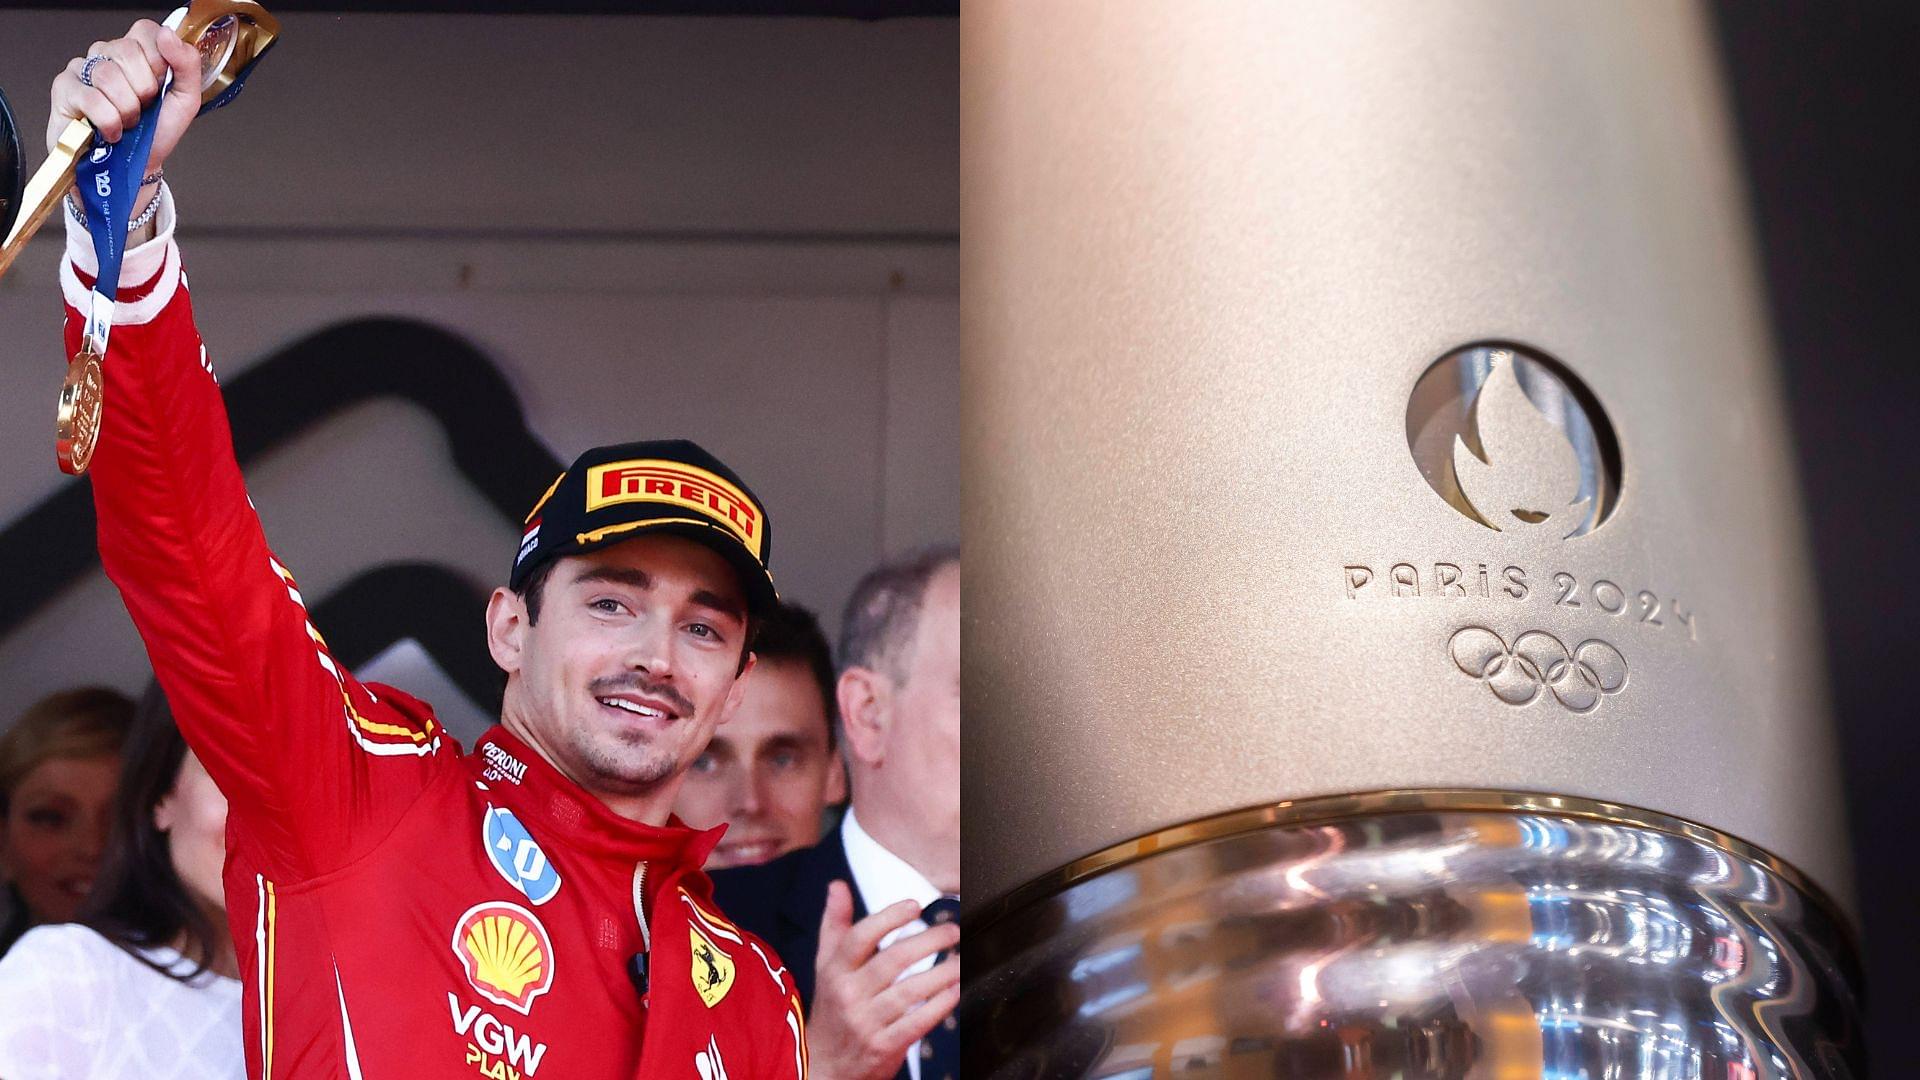 Watch: Charles Leclerc Carries the Olympic Torch to Represent Monaco Weeks After Iconic Triumph